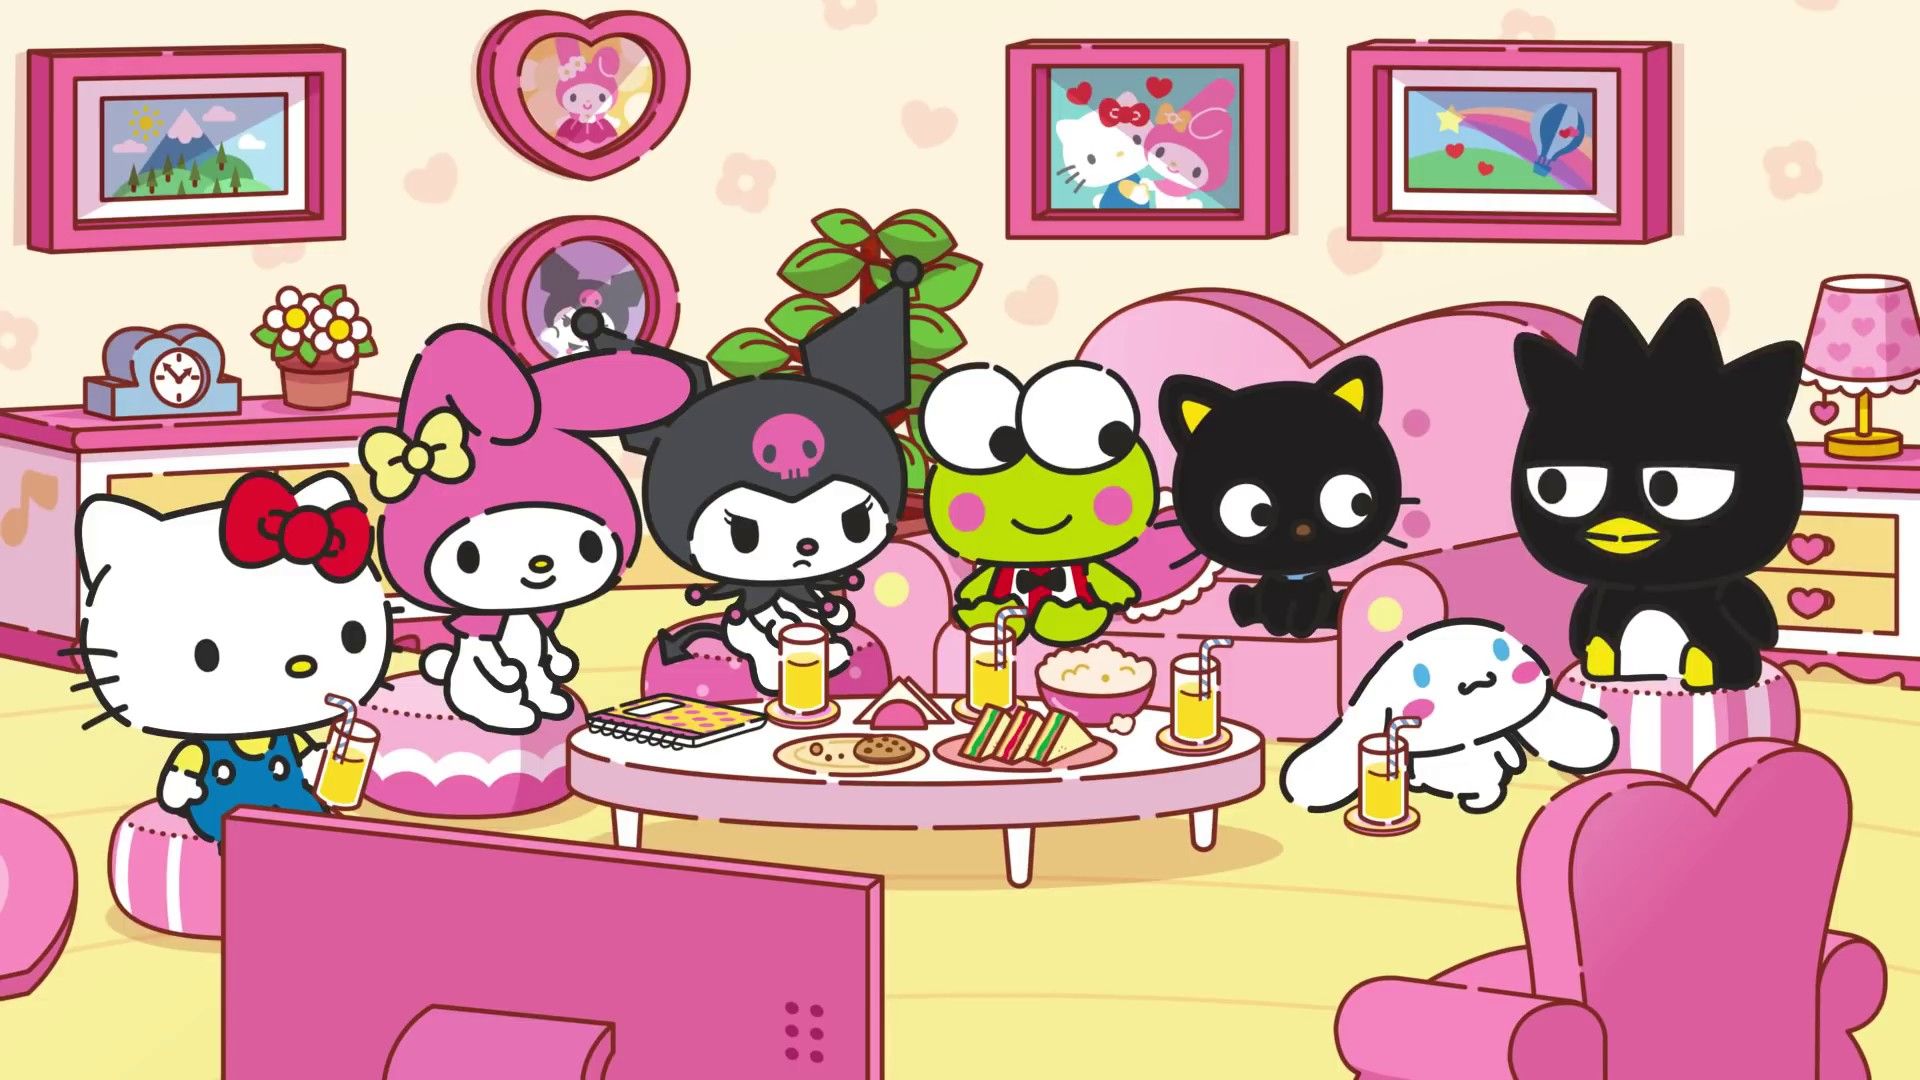 Sanrio characters sitting around a table with food and drinks. - Sanrio